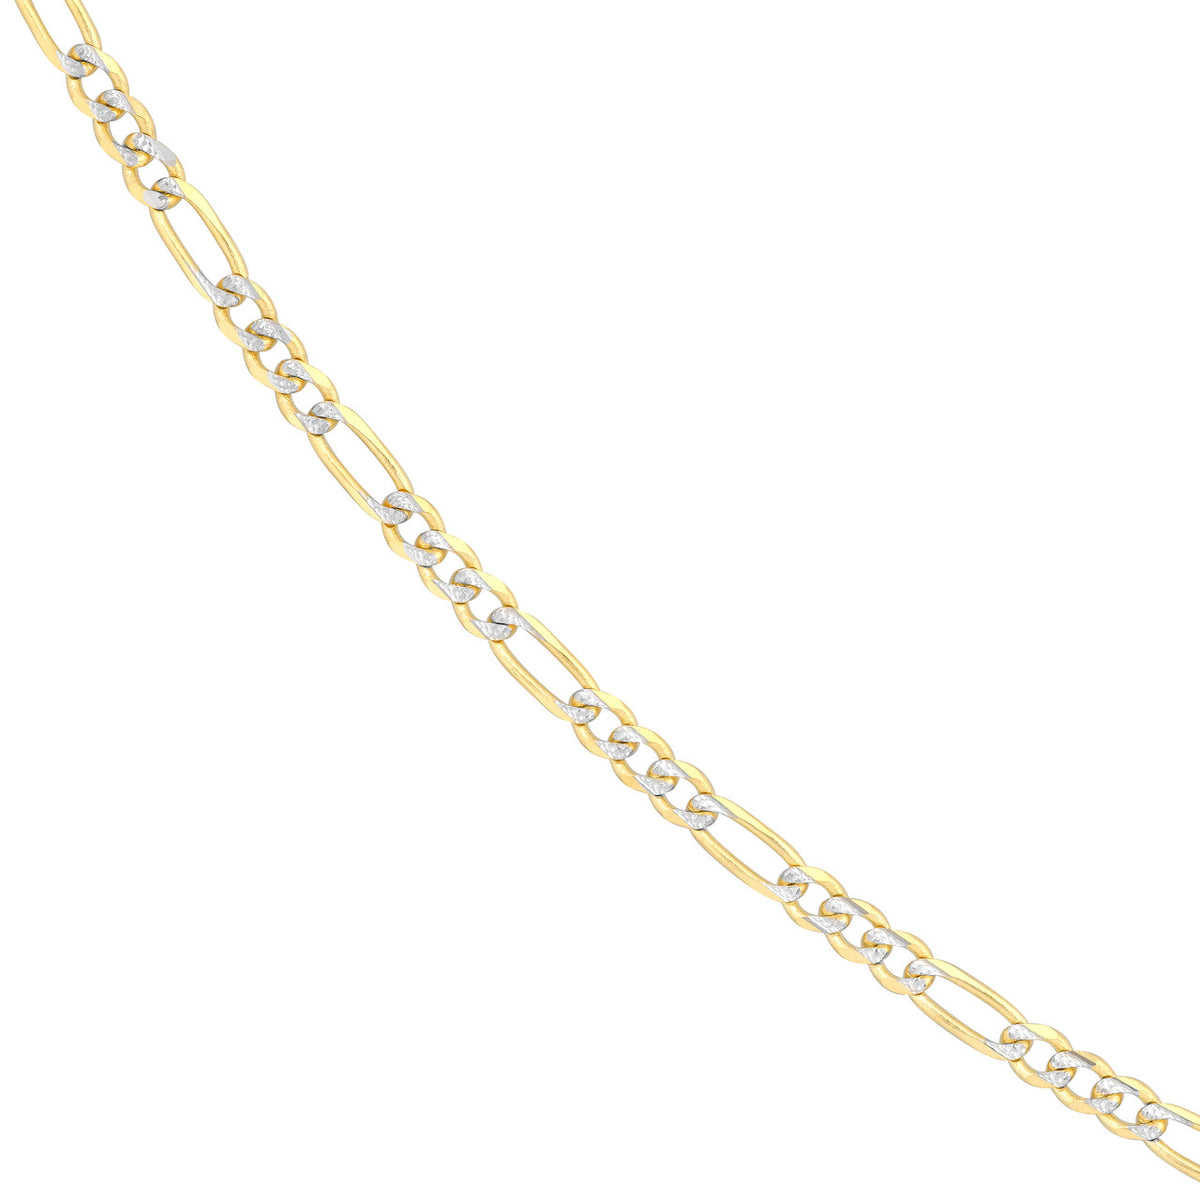 14k Yellow White Gold 3.2mm Two-Tone Pave Figaro Chain Necklace with Lobster Lock